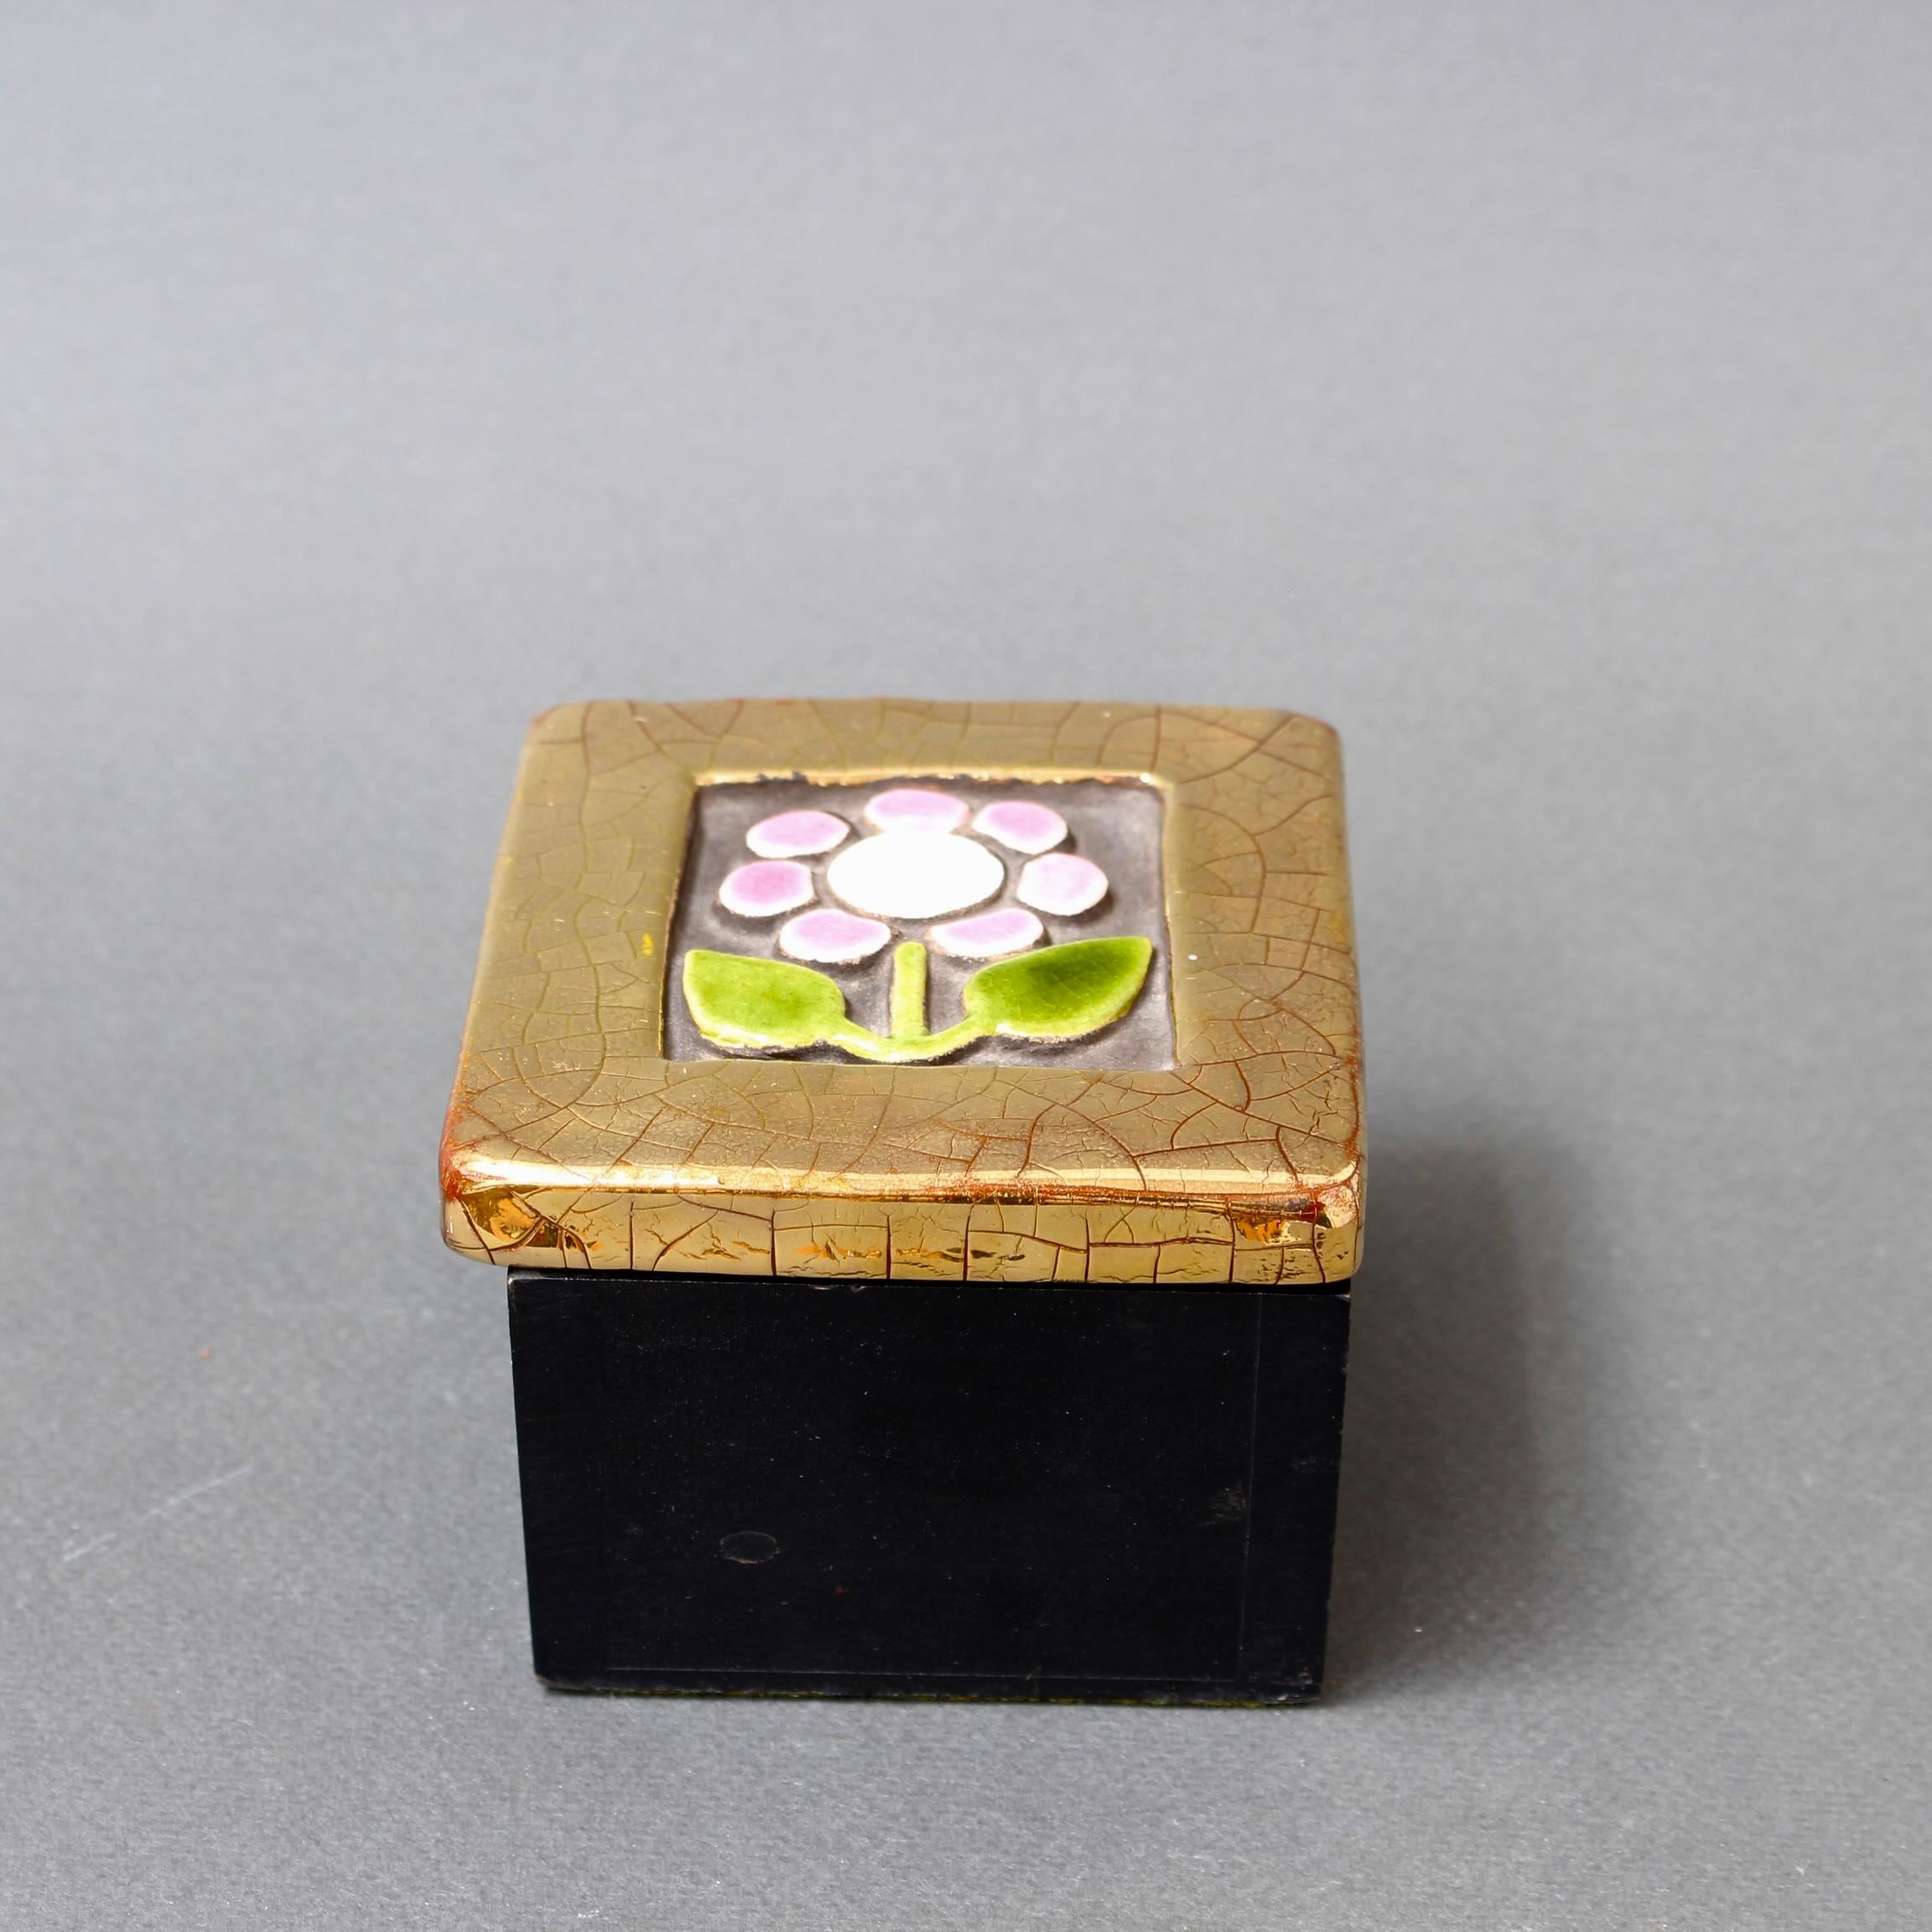 Vintage French Jewellery Box with Decorative Ceramic Lid by Mithé Espelt  In Good Condition For Sale In London, GB